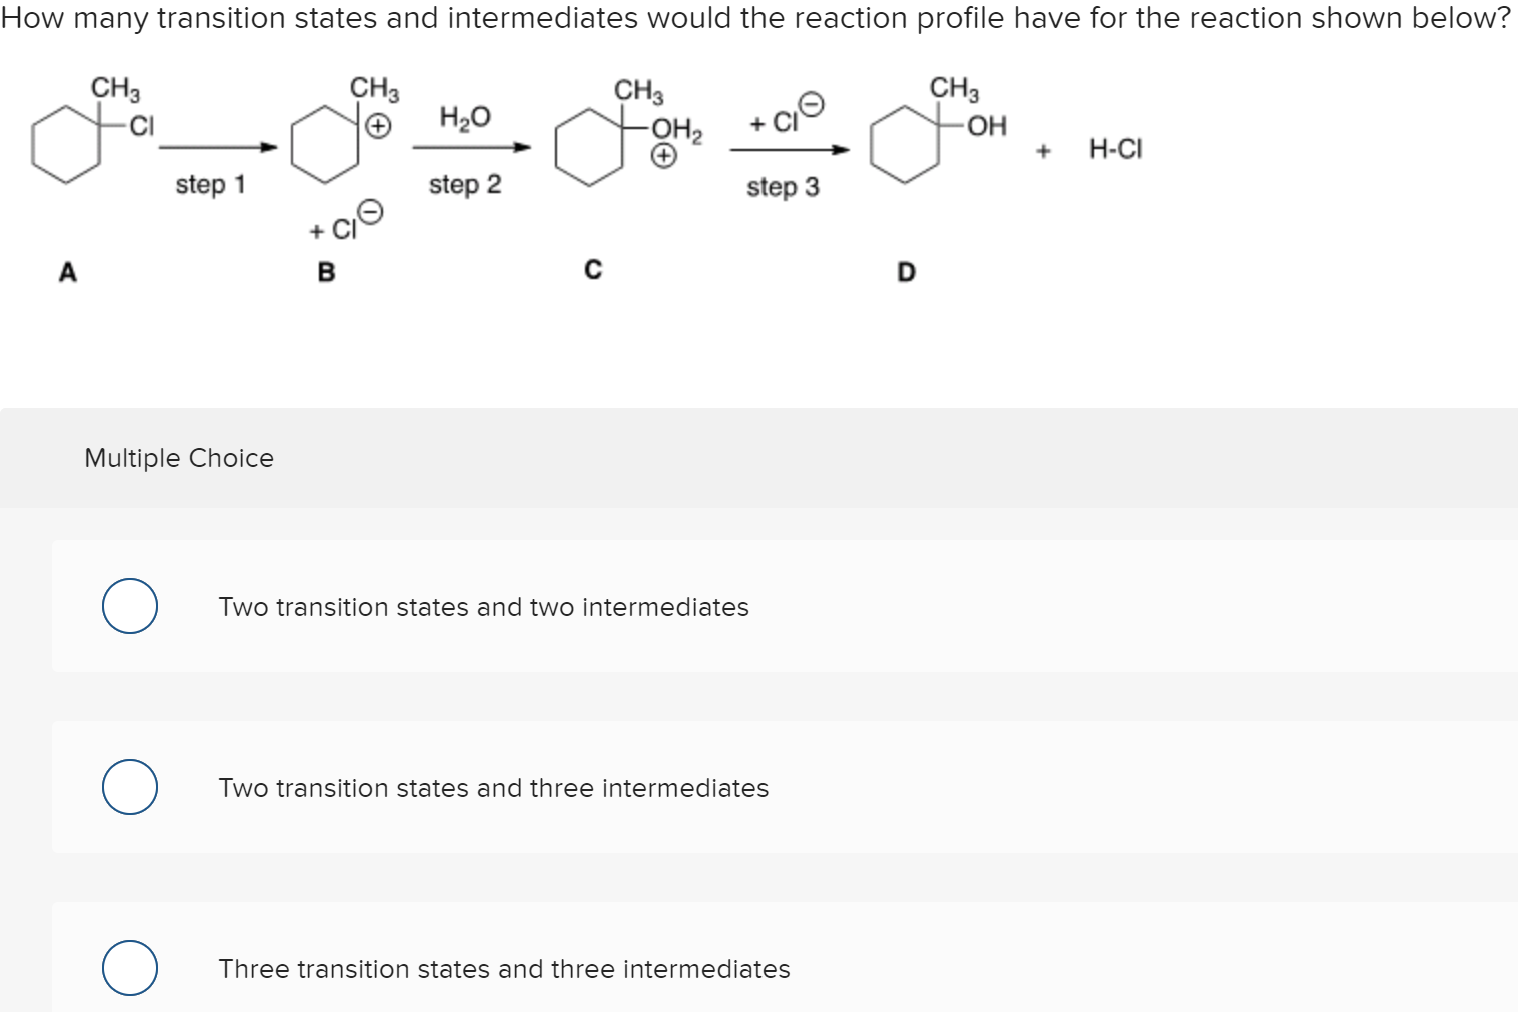 How many transition states and intermediates would the reaction profile have for the reaction shown below?
